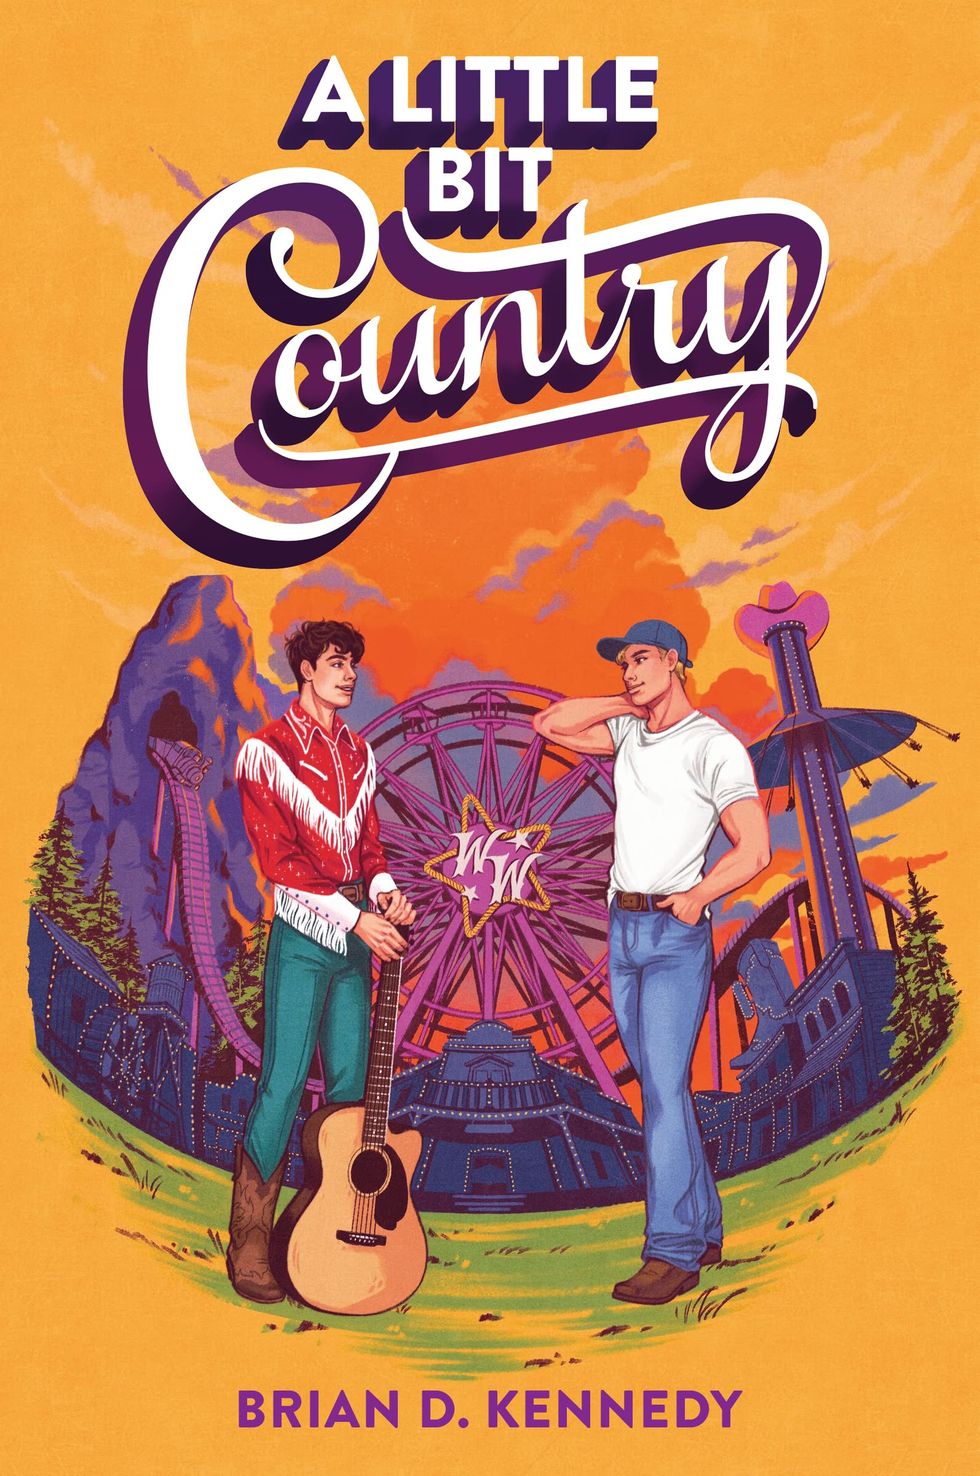 Debut - A Little Bit Country by Brian D. Kennedy